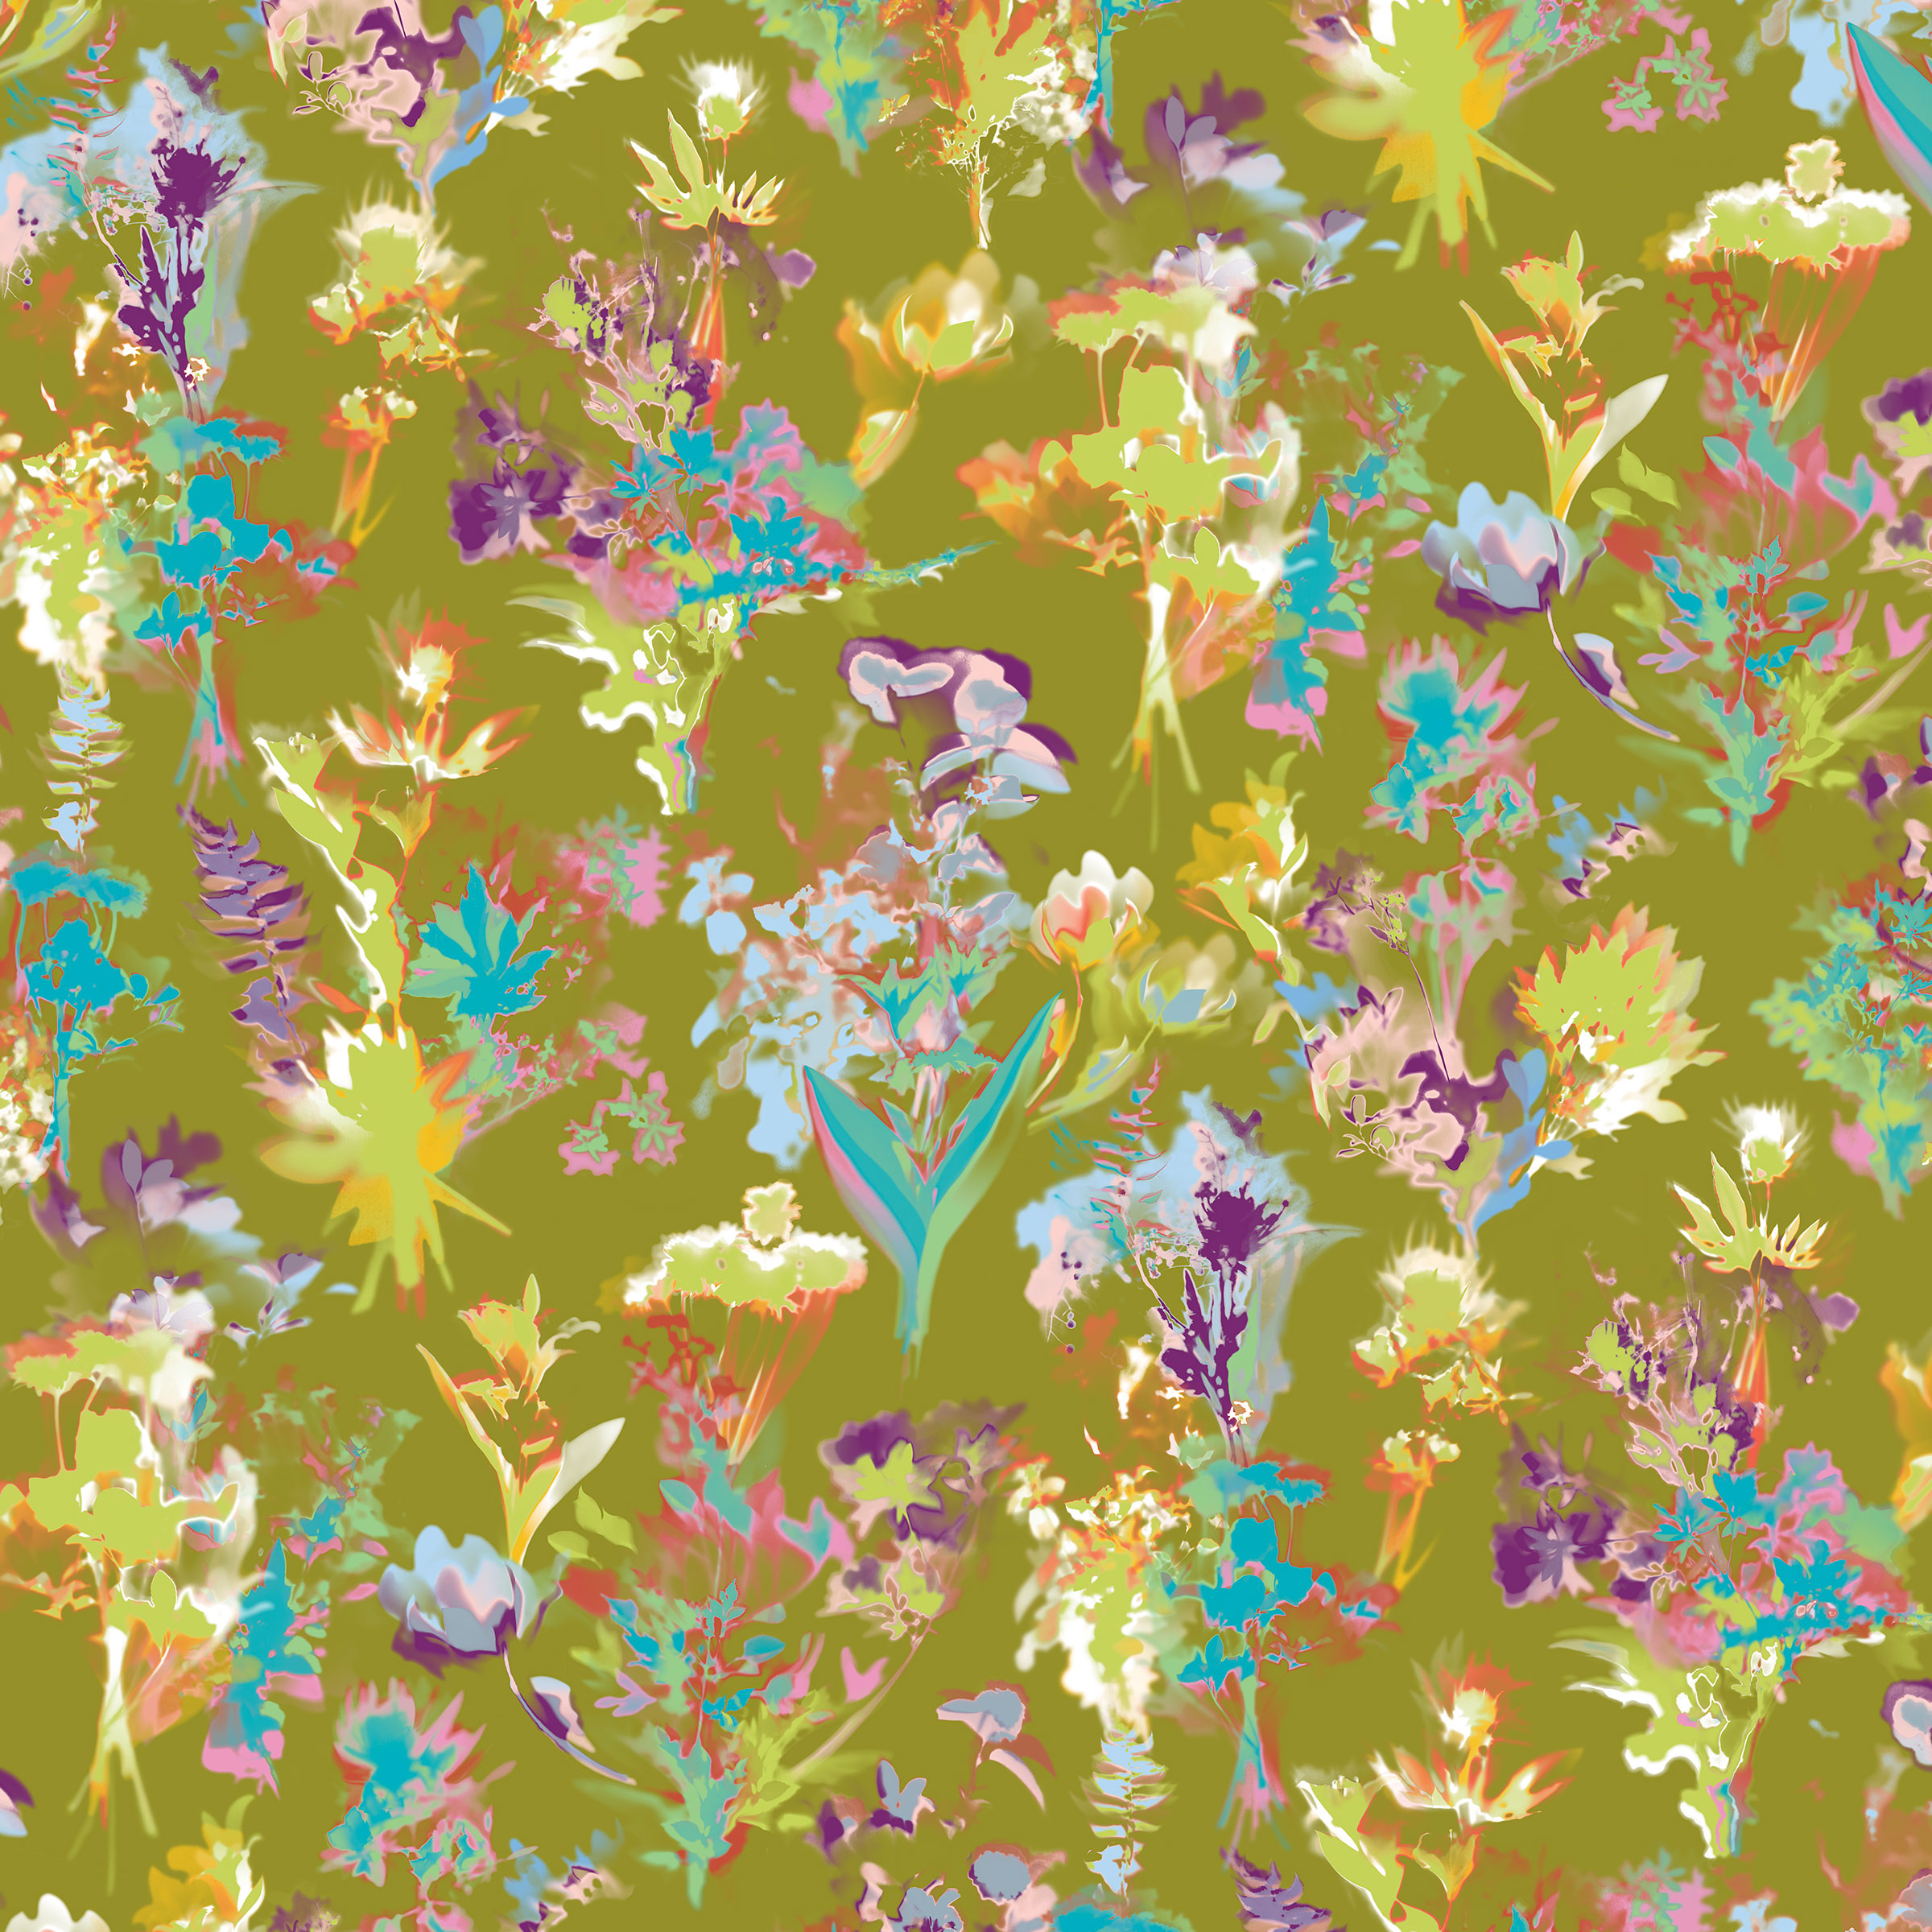 Floral upholstery pattern for interior design. Green colourway.